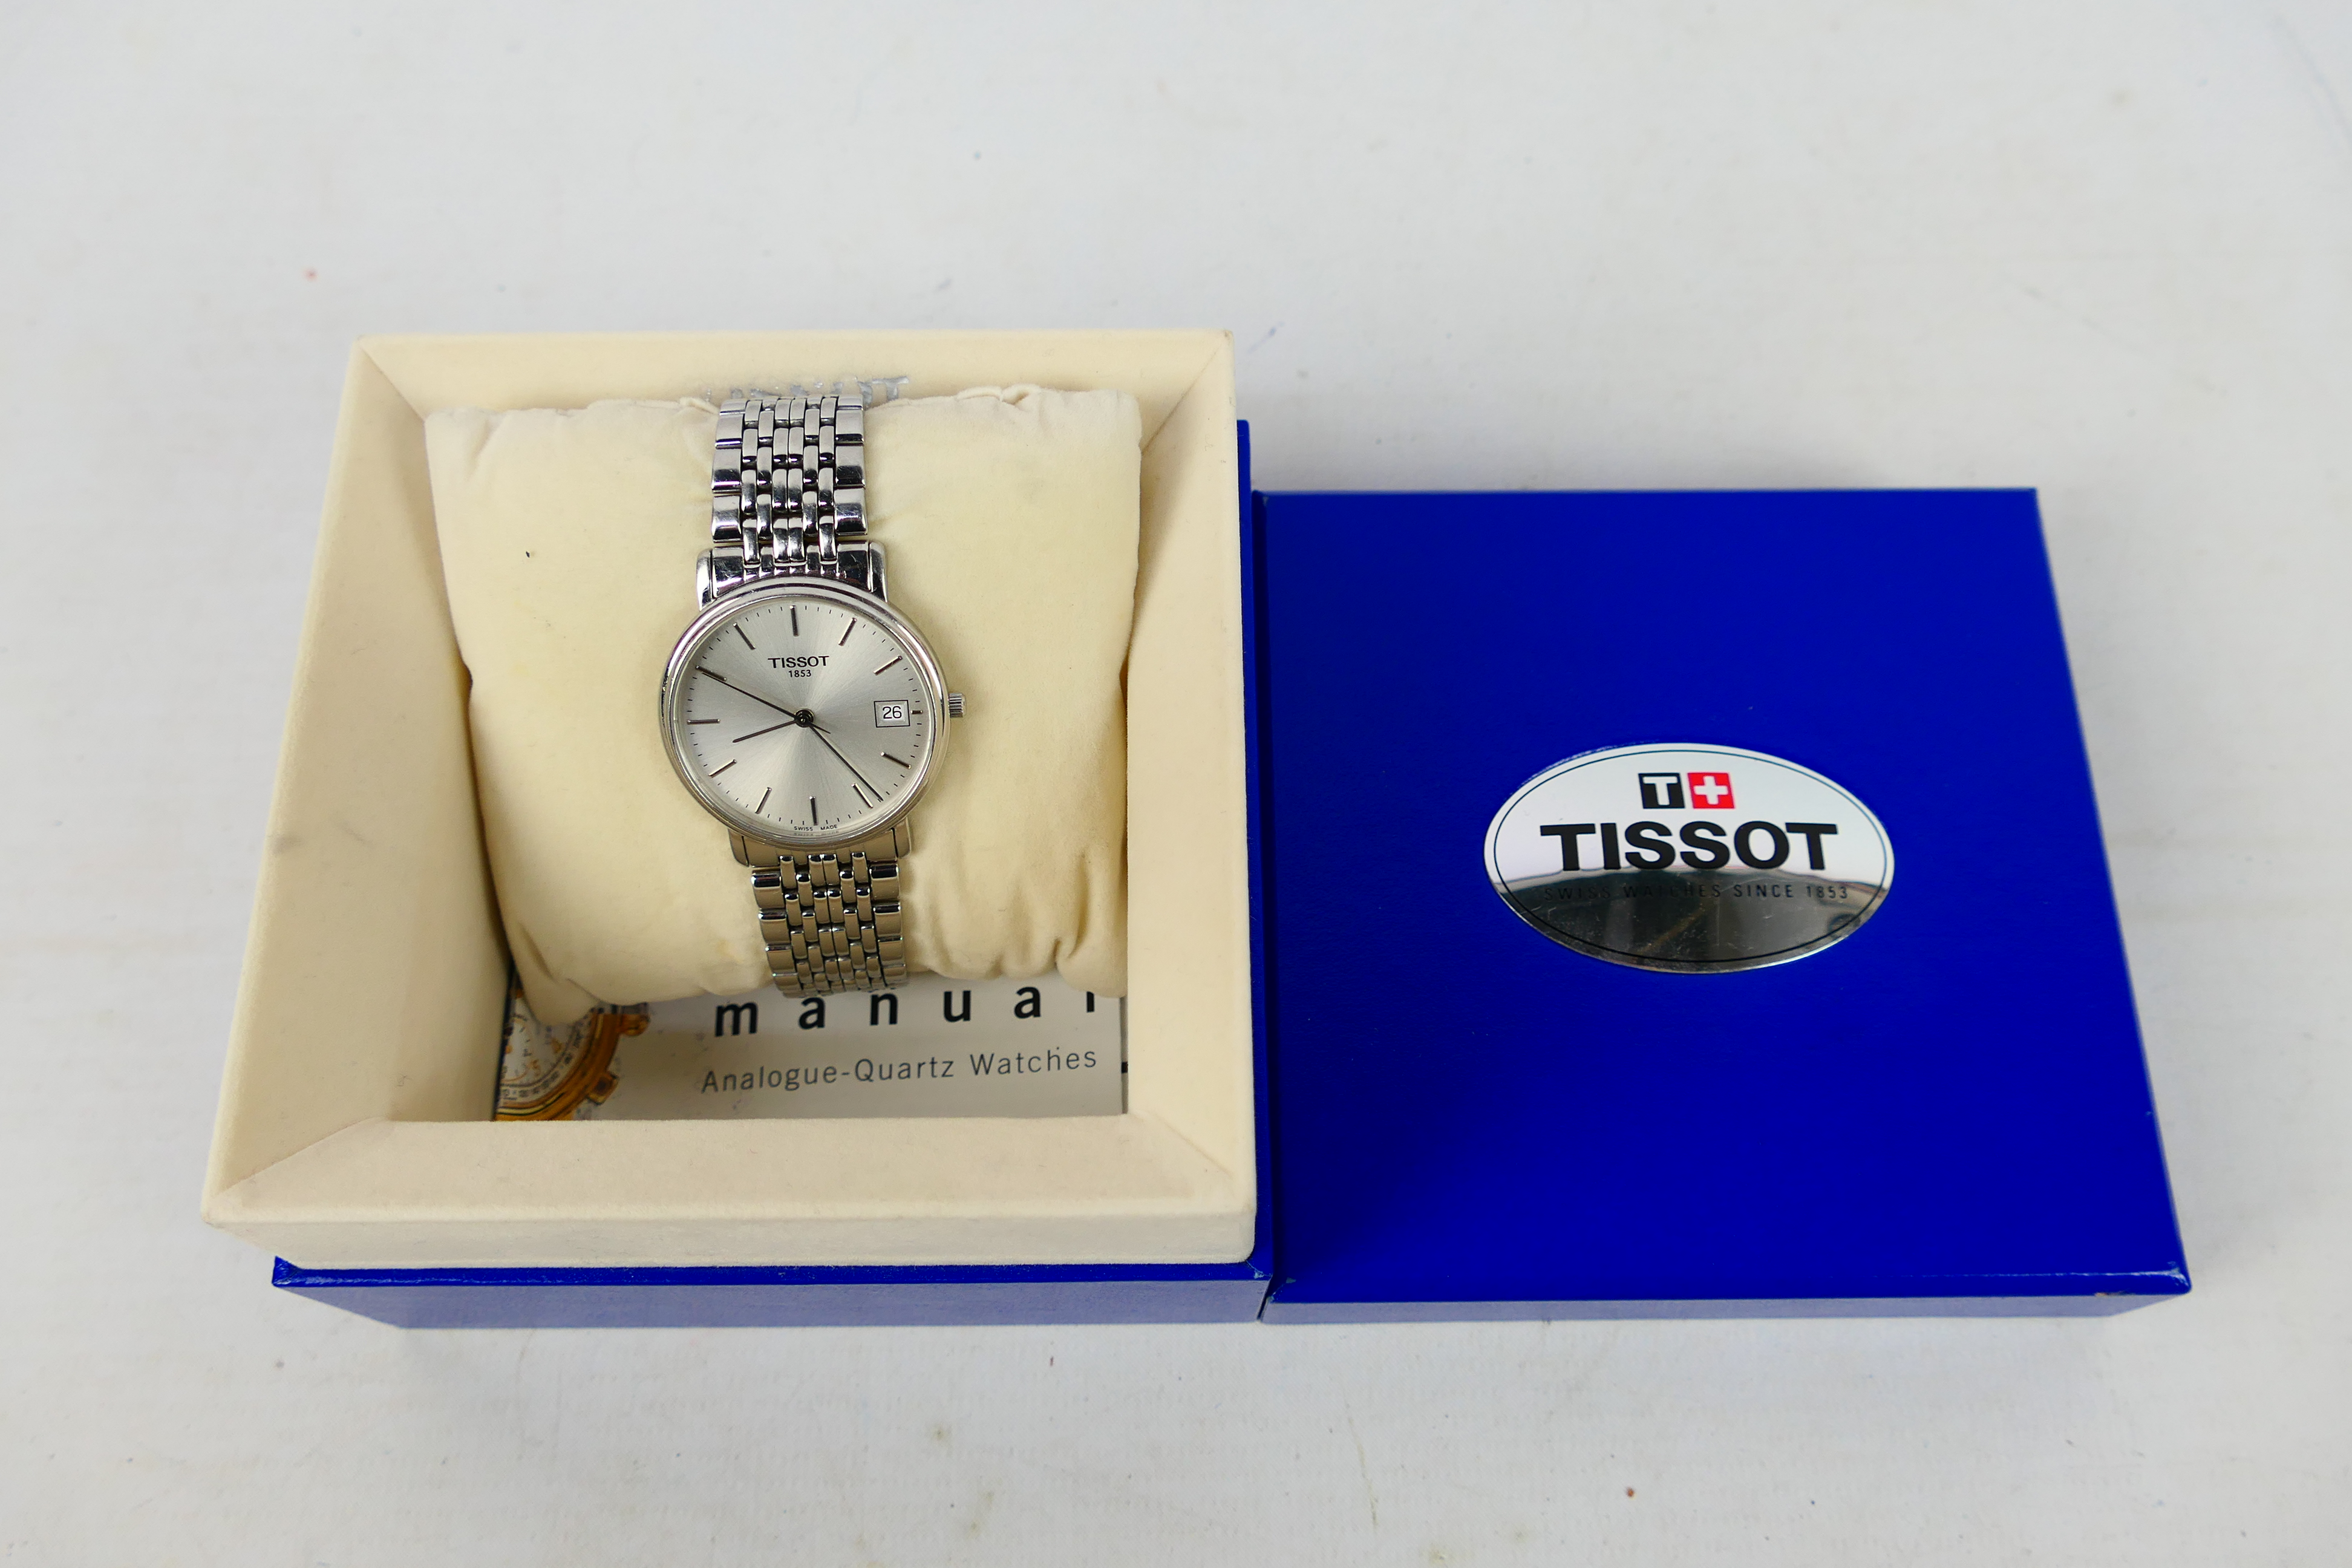 A stainless steel Tissot wrist watch contained in original box with paperwork.